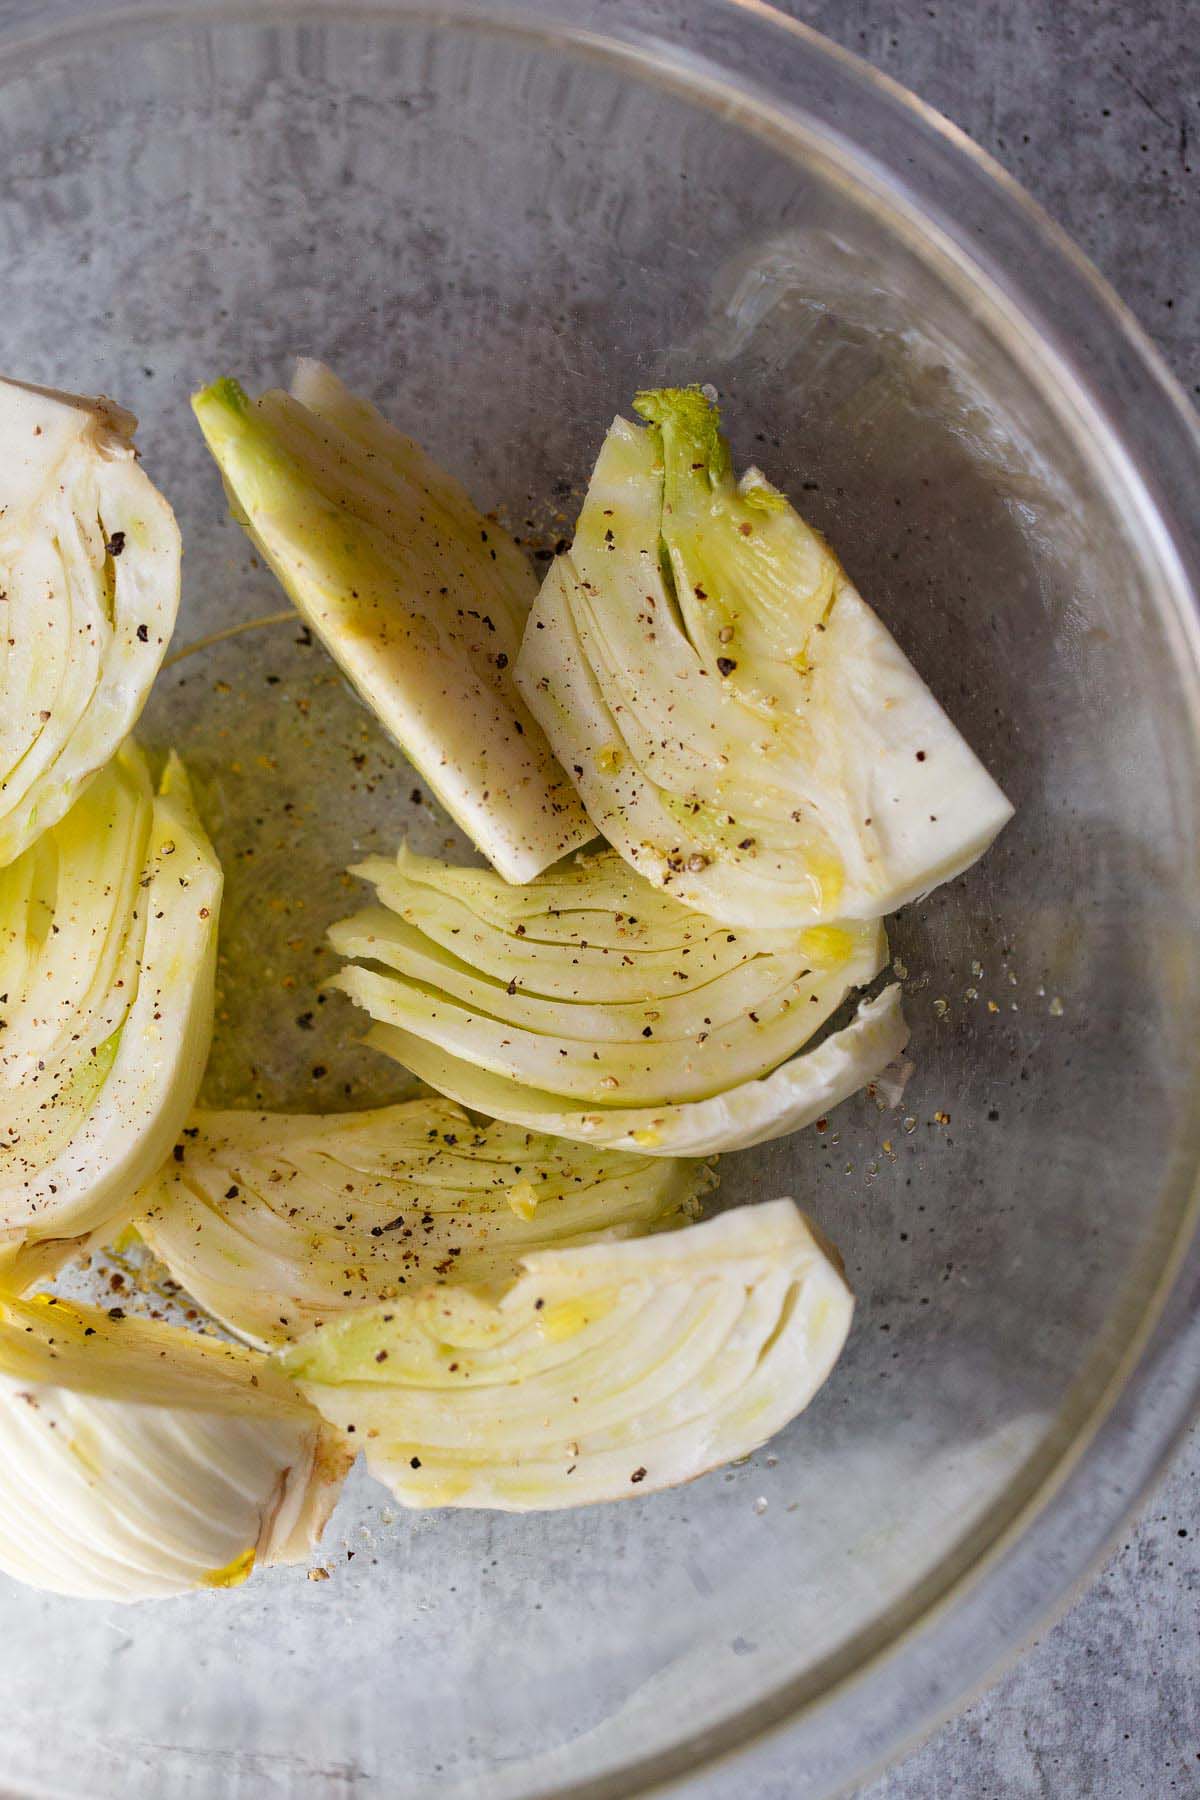 Fennel wedges in a bowl with olive oil, salt, and pepper.